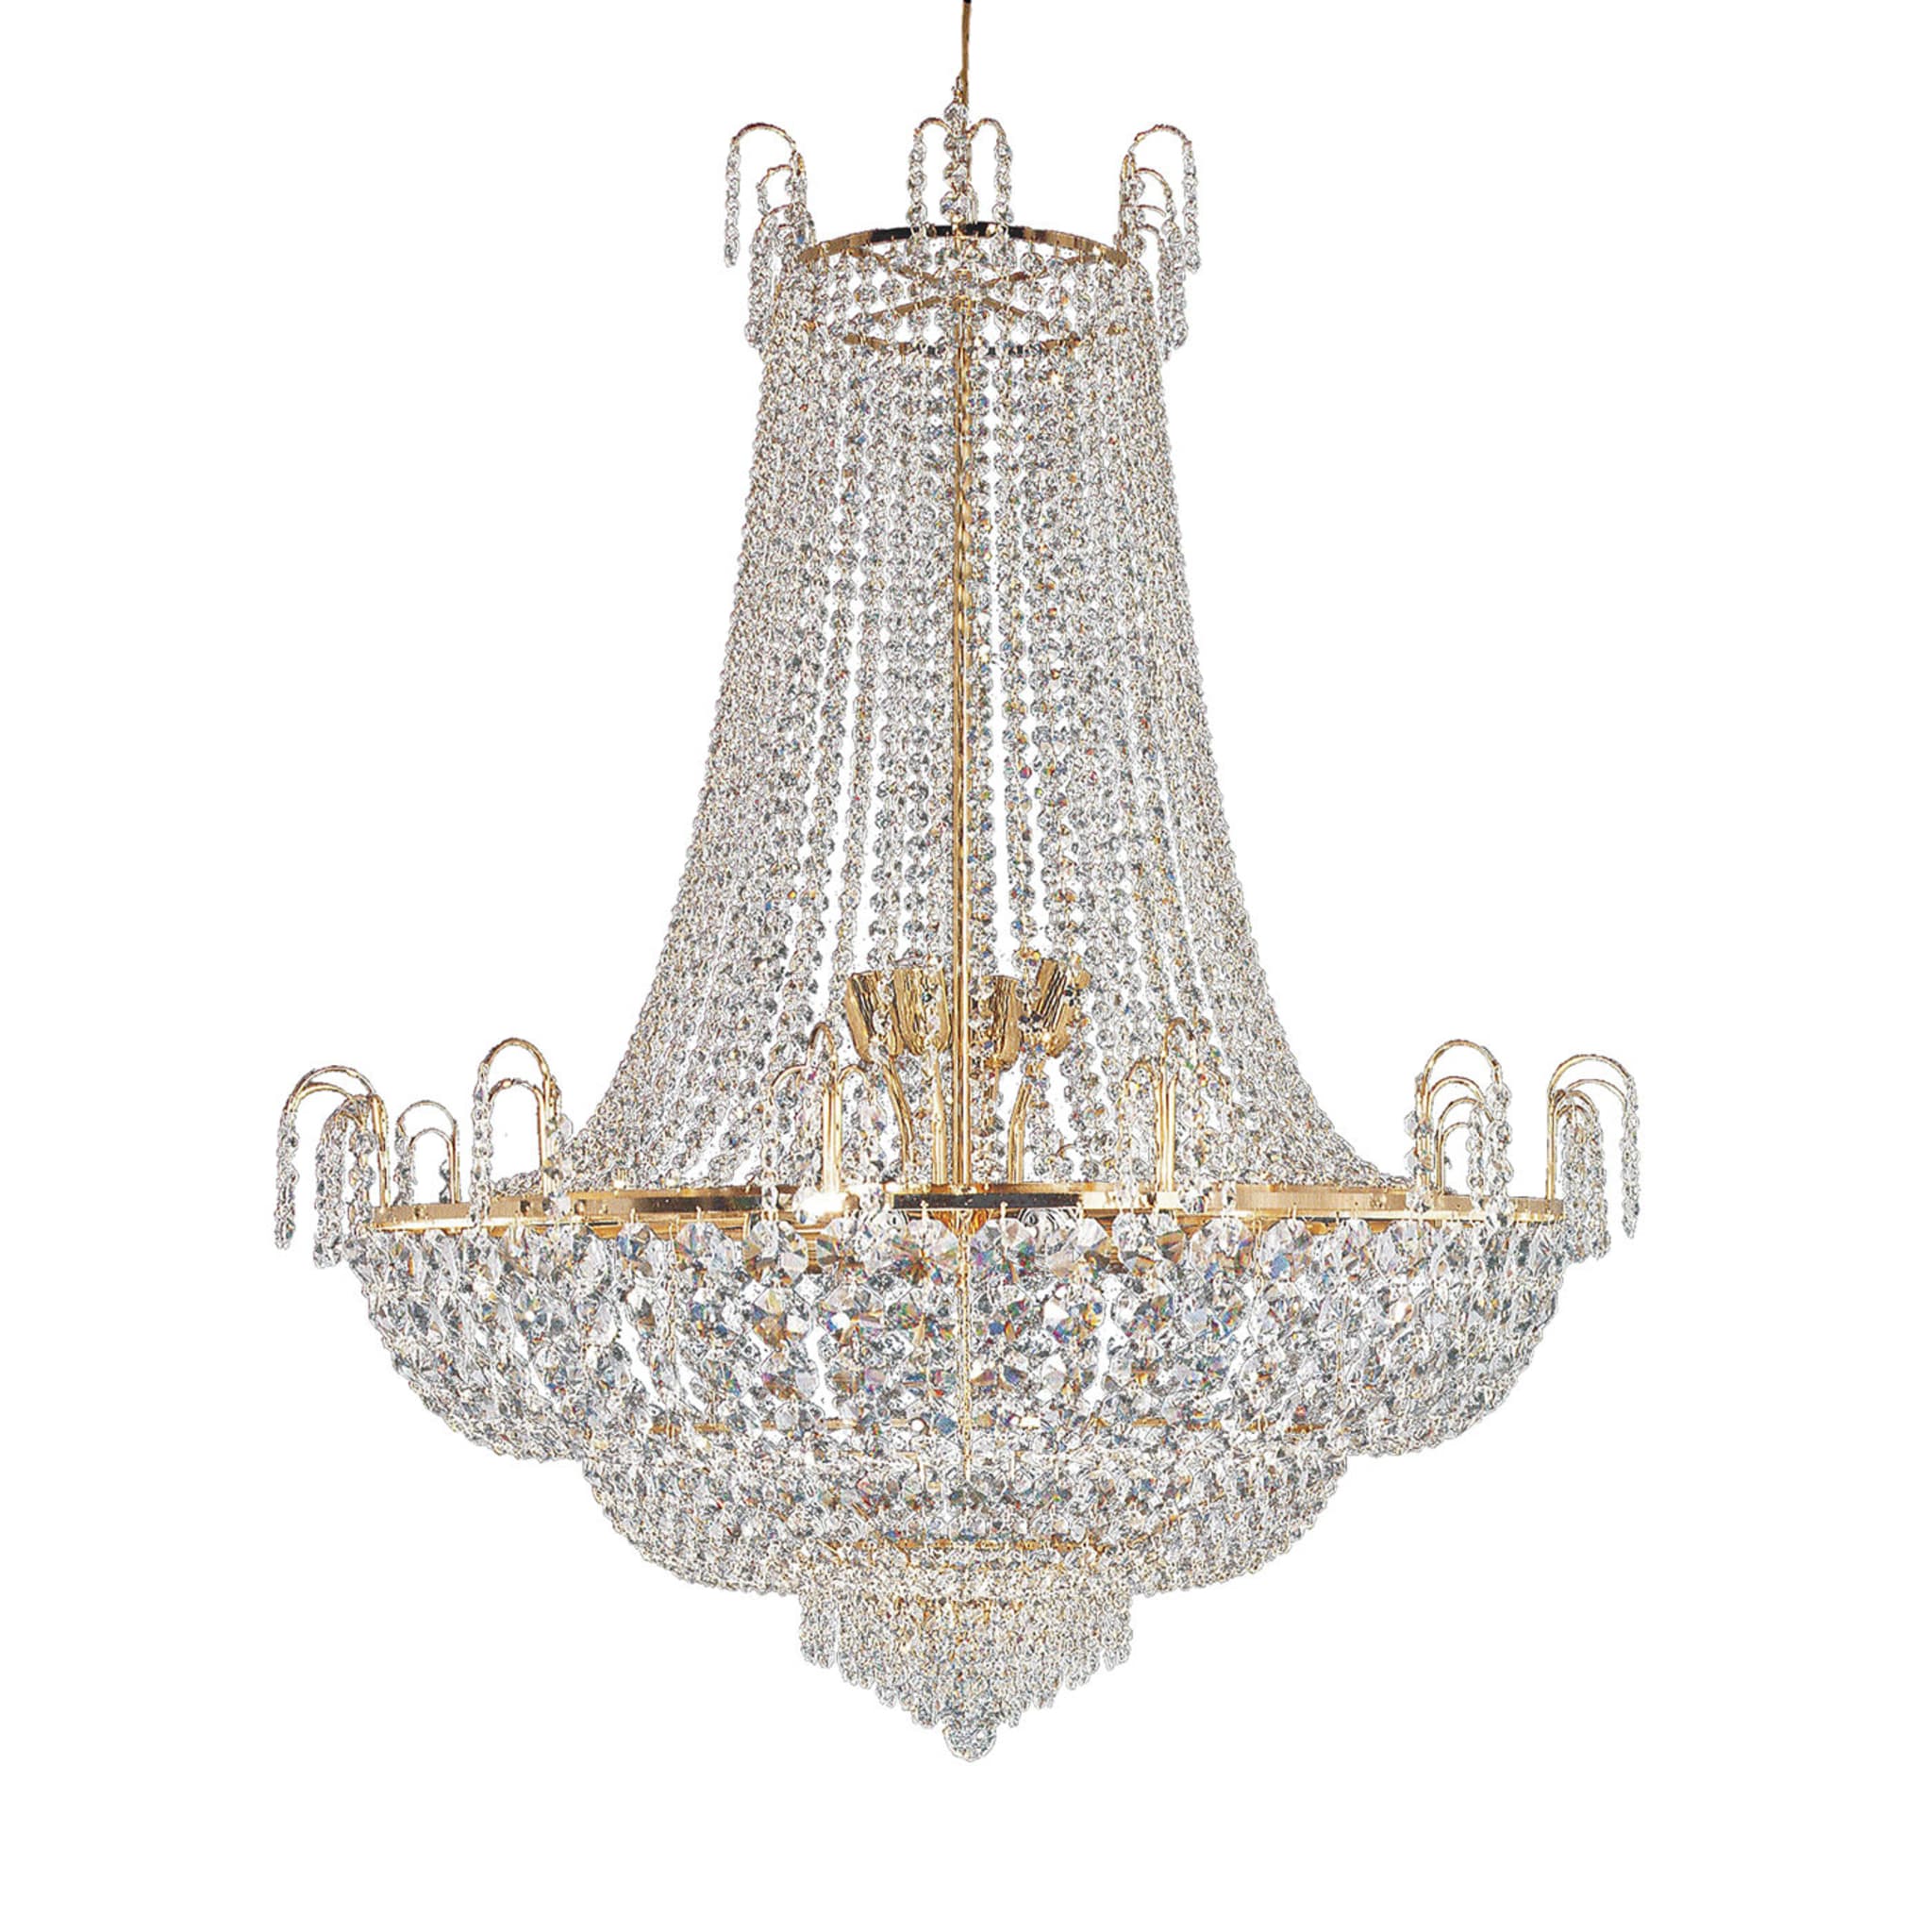 Impero 18-Light Chandelier - Main view